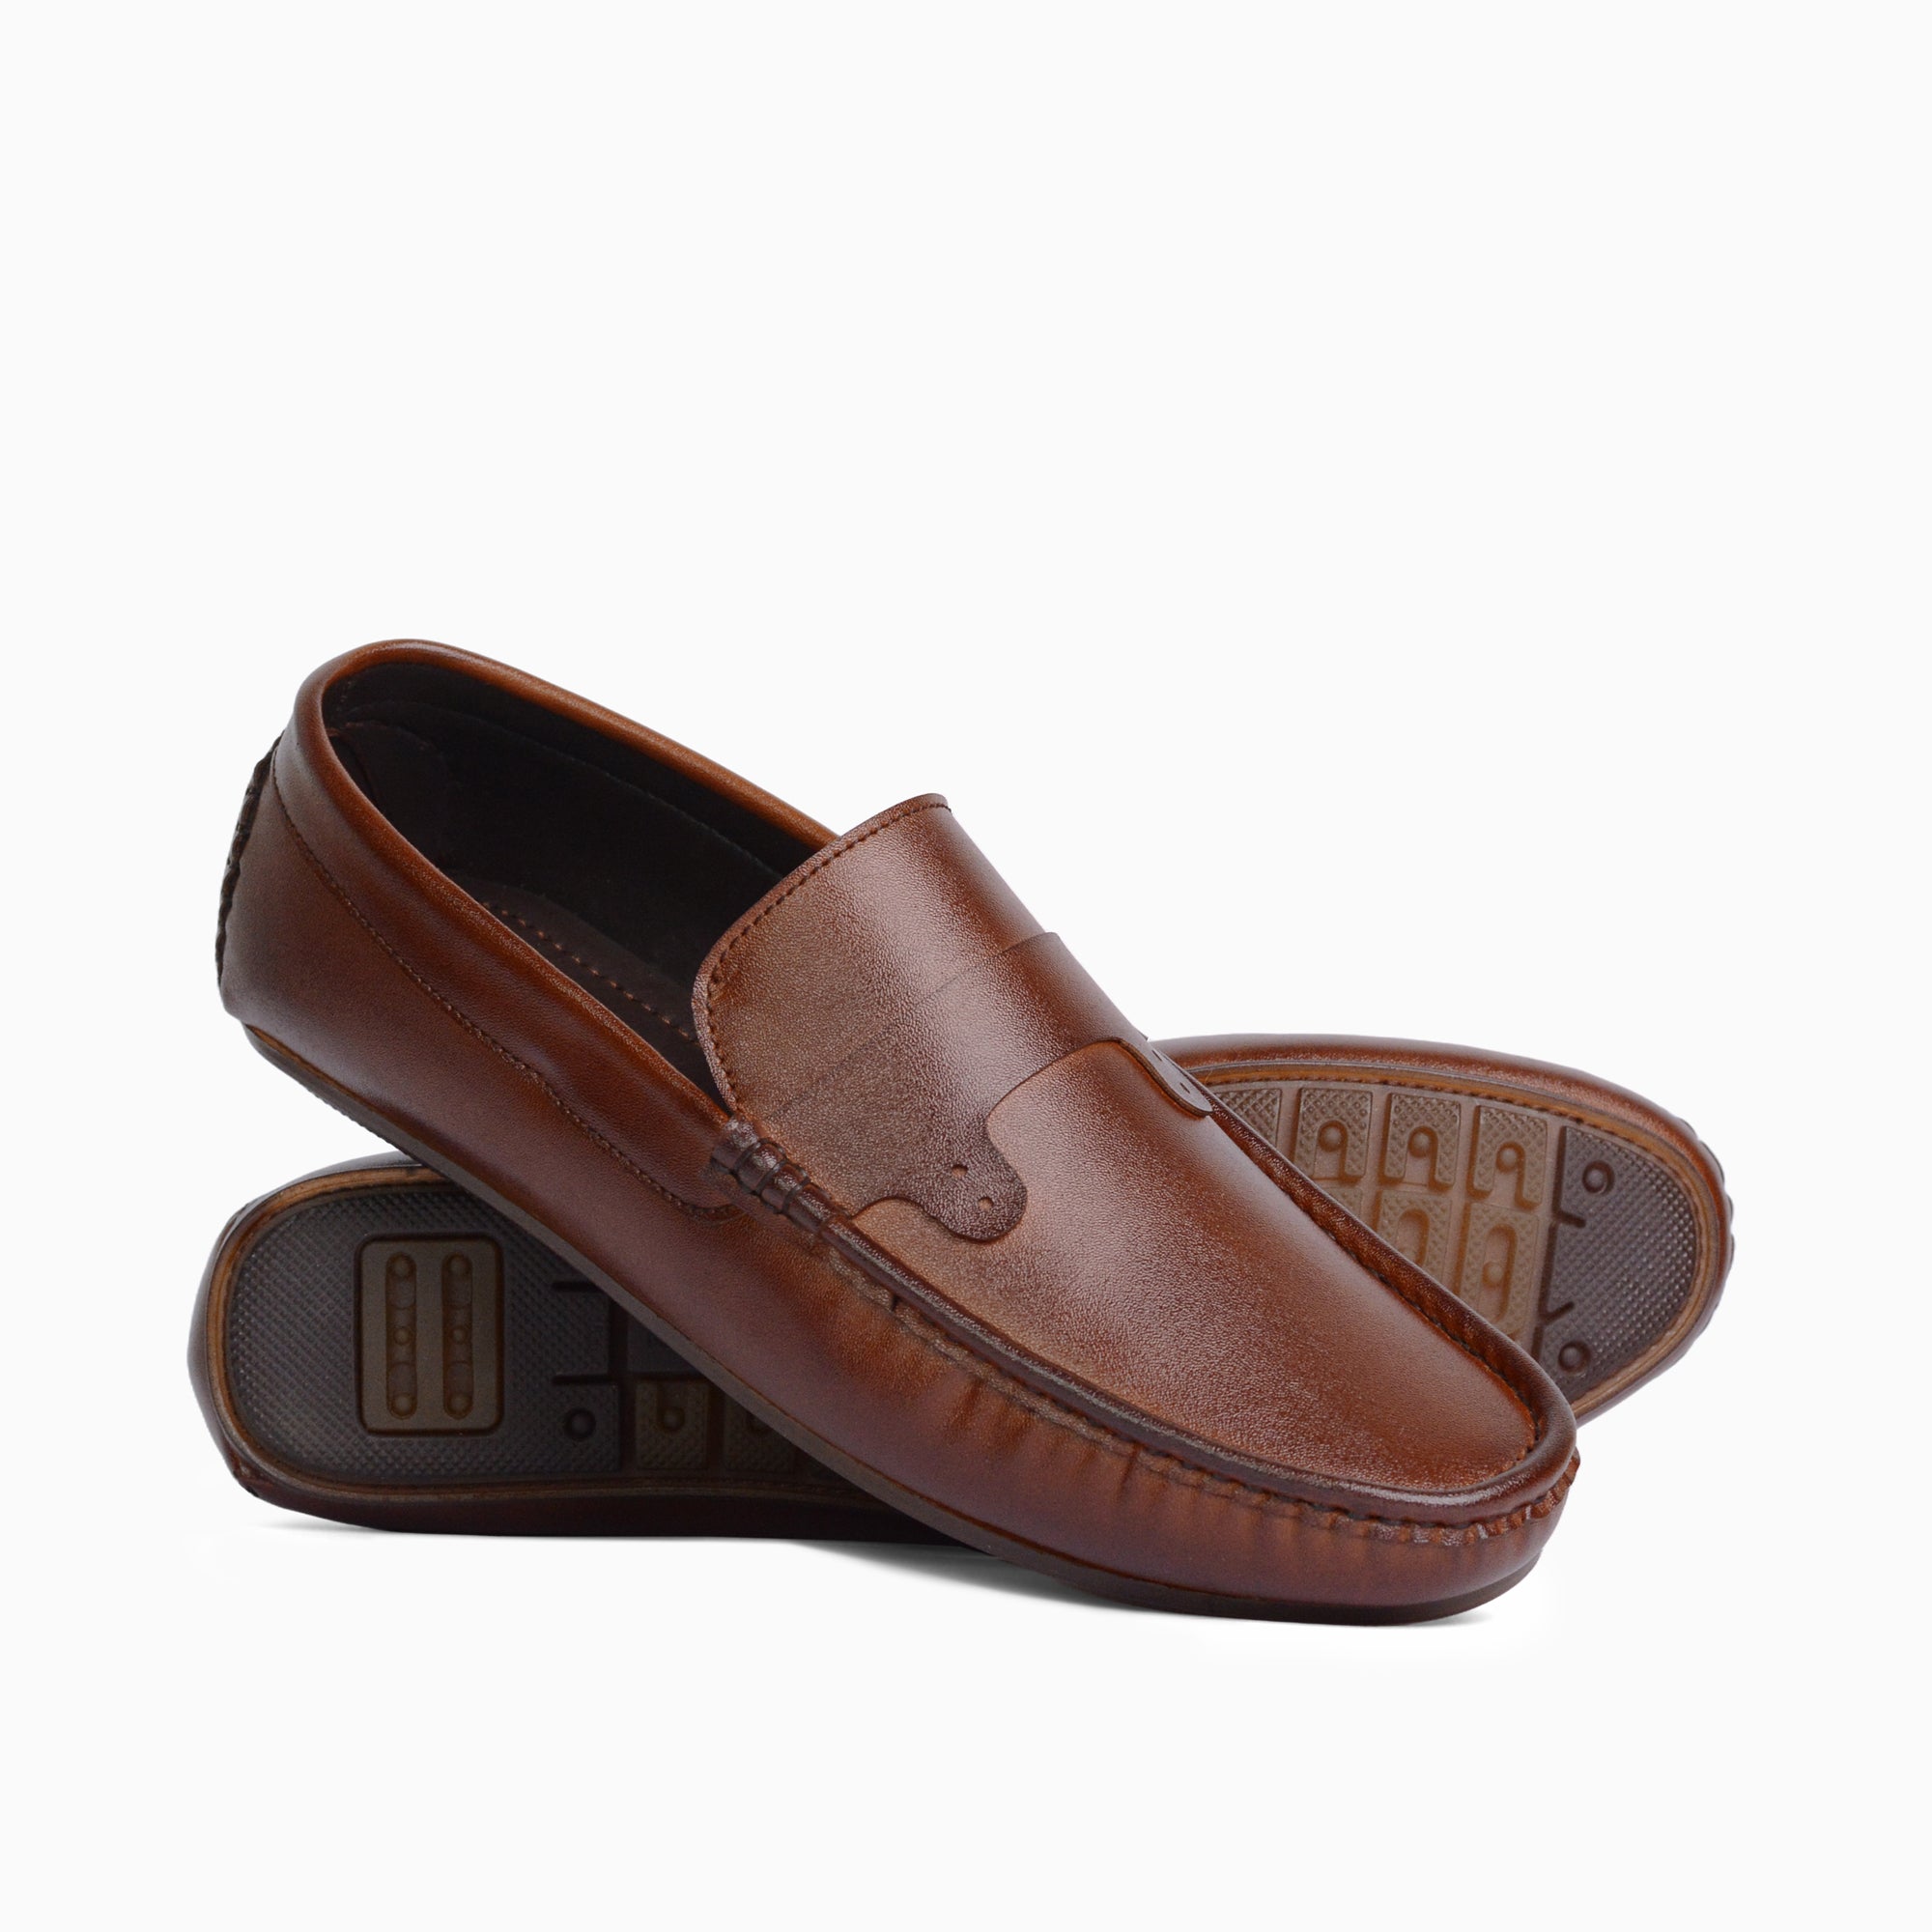 Classic Brown Loafer LS16